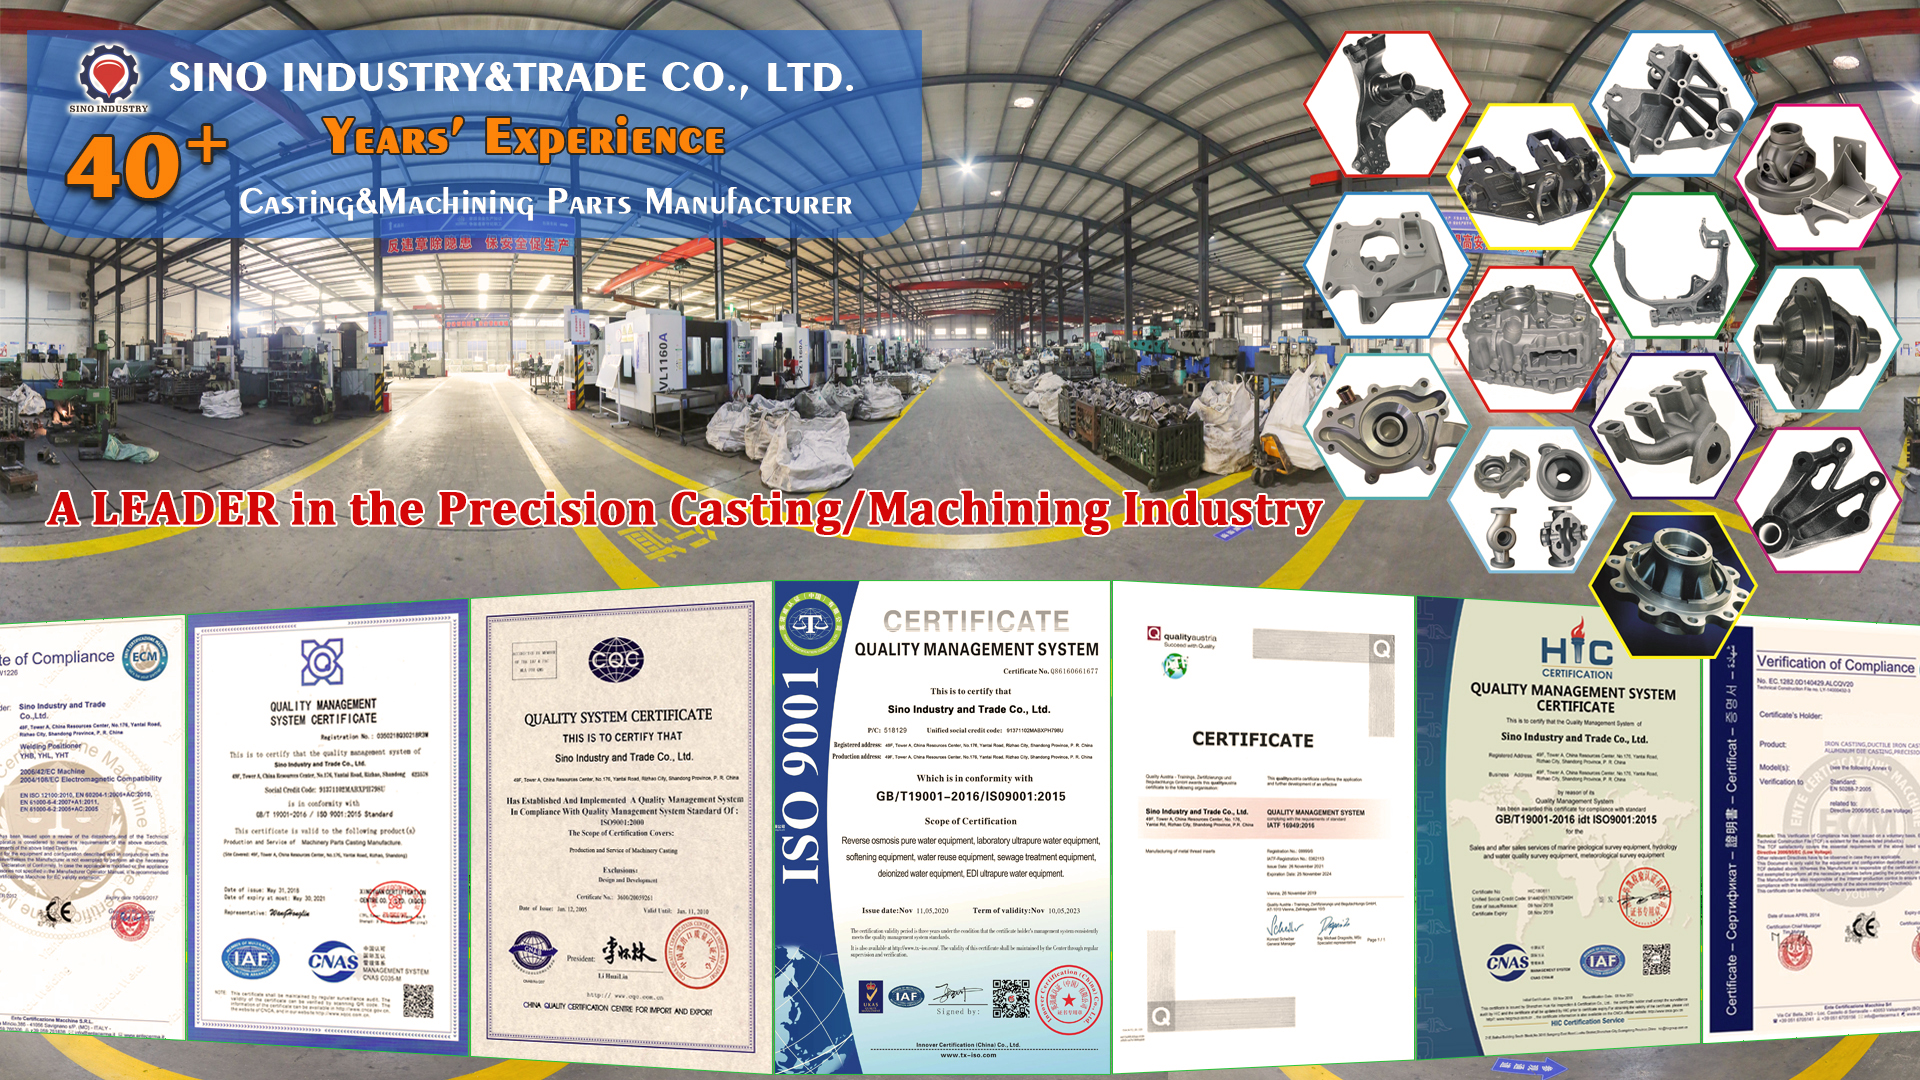 A Leader in the Precision Casting Industry